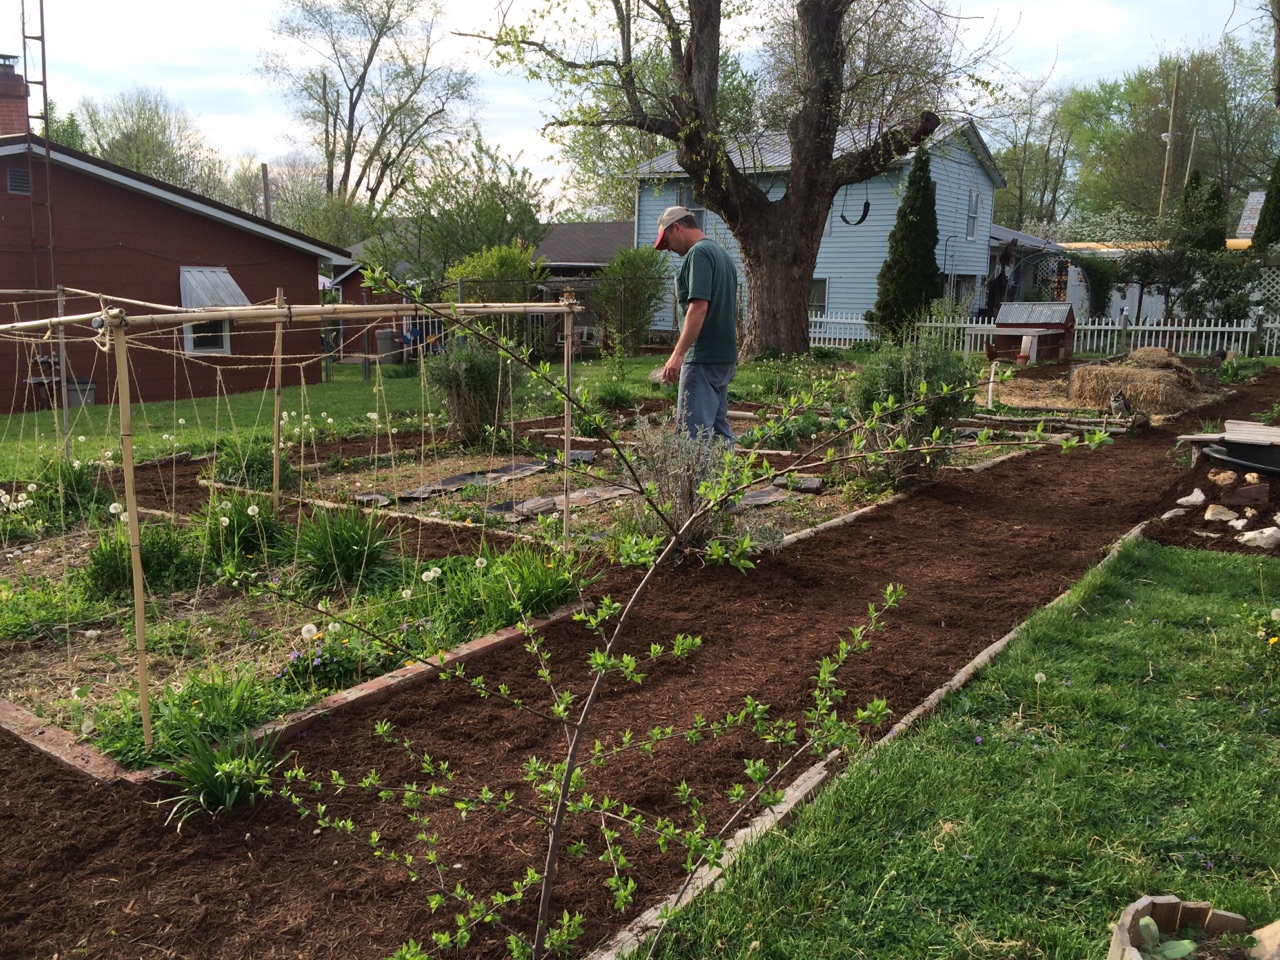 Permaculture Farming: What it is and Resources to Get Started